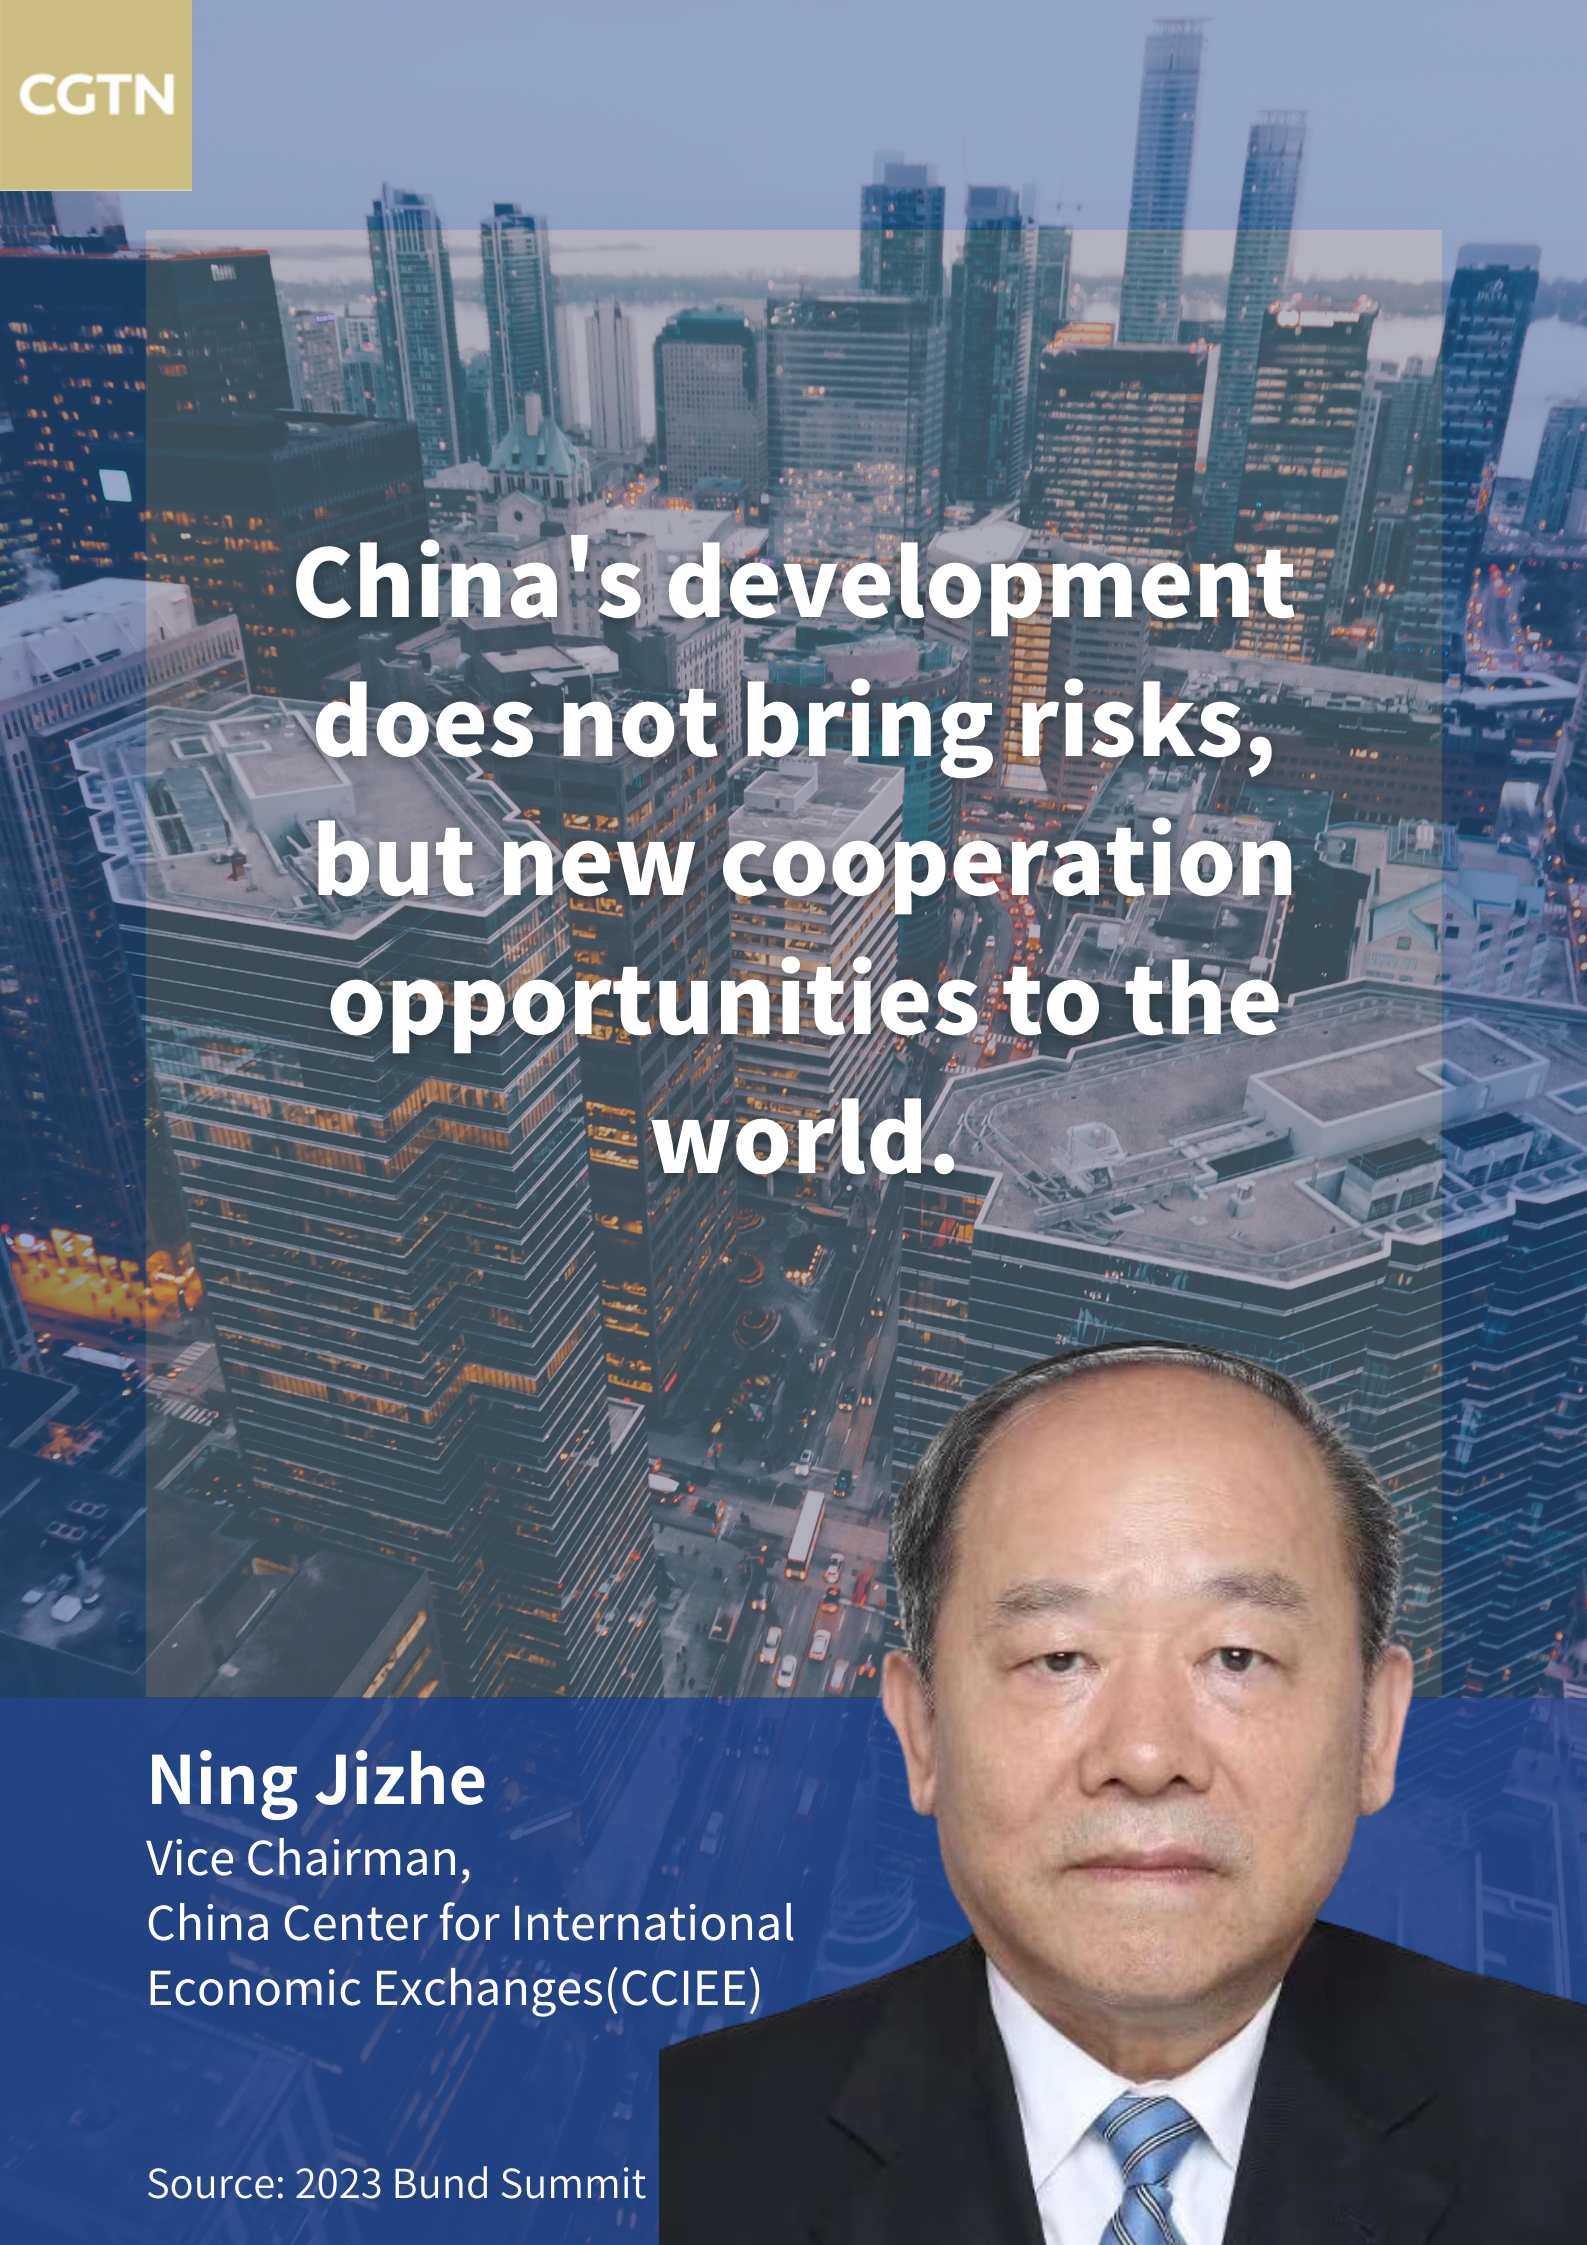 Highlights of 2023 Bund Summit: Insights on global cooperation